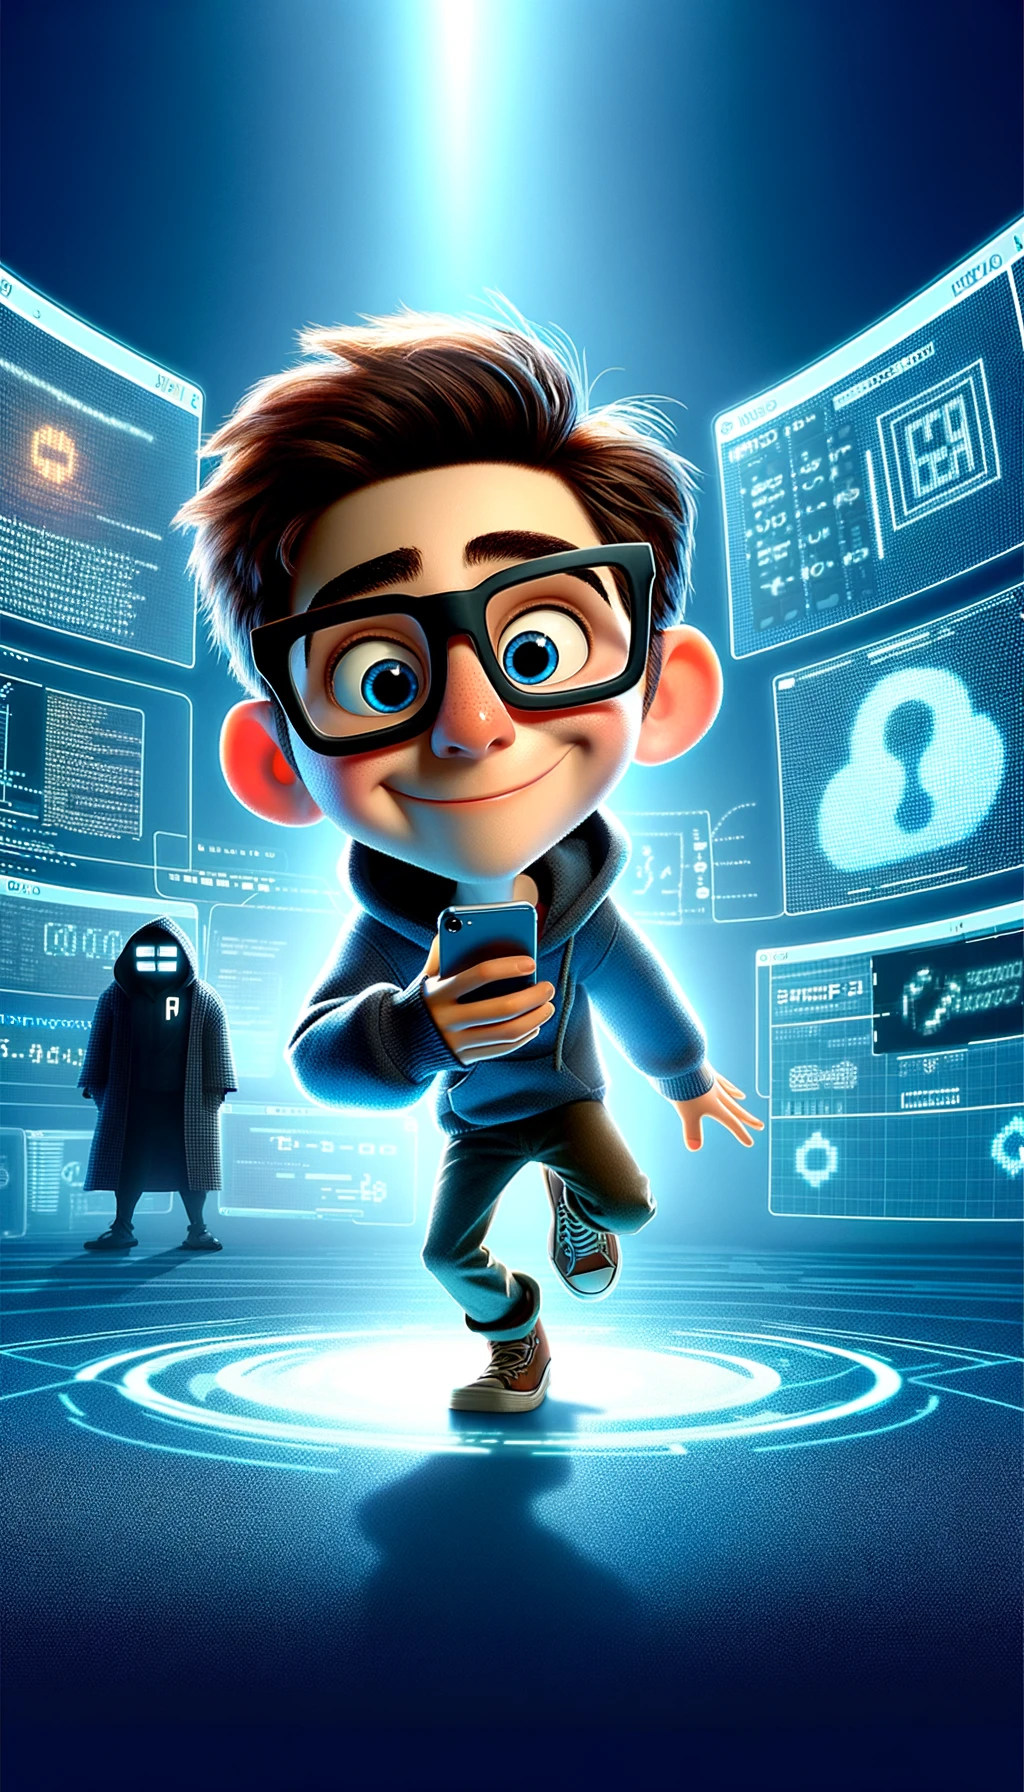 A Pixar-style movie poster featuring a hacker in action, designed with a light-hearted, adventurous tone. The character is a young, genius hacker with an engaging and friendly appearance, complete with oversized glasses and a quirky expression. The background showcases a high-tech digital world, with floating code and holographic screens surrounding the hacker. The mood is exciting and mysterious, with a touch of humor in the form of digital 'sidekick' characters.